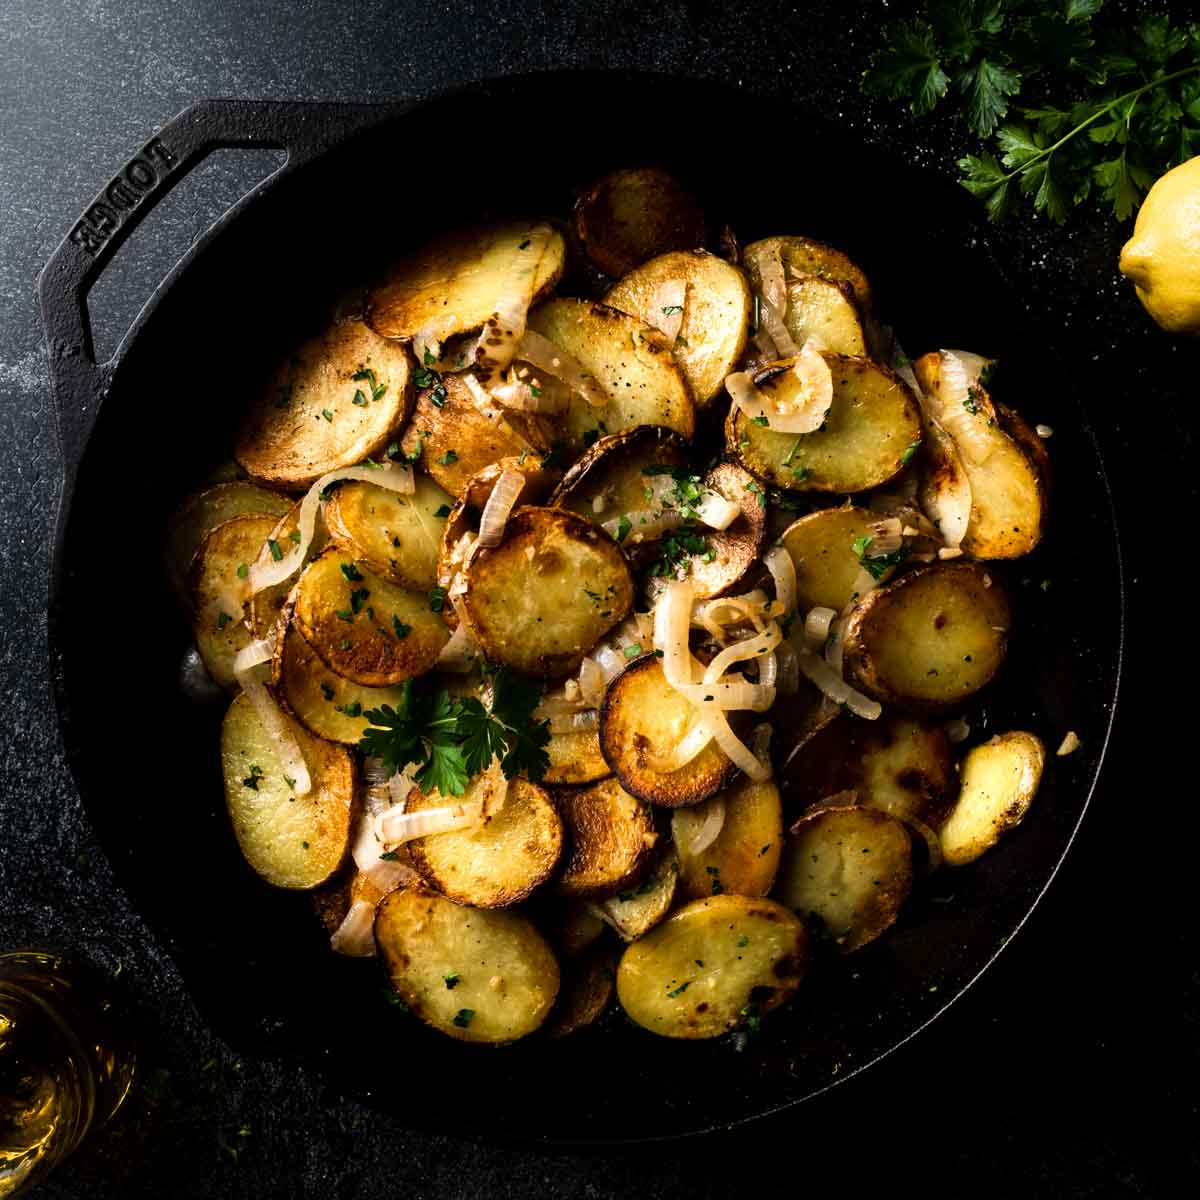 A big skillet filled with Lyonnaise potatoes garnished with parsley